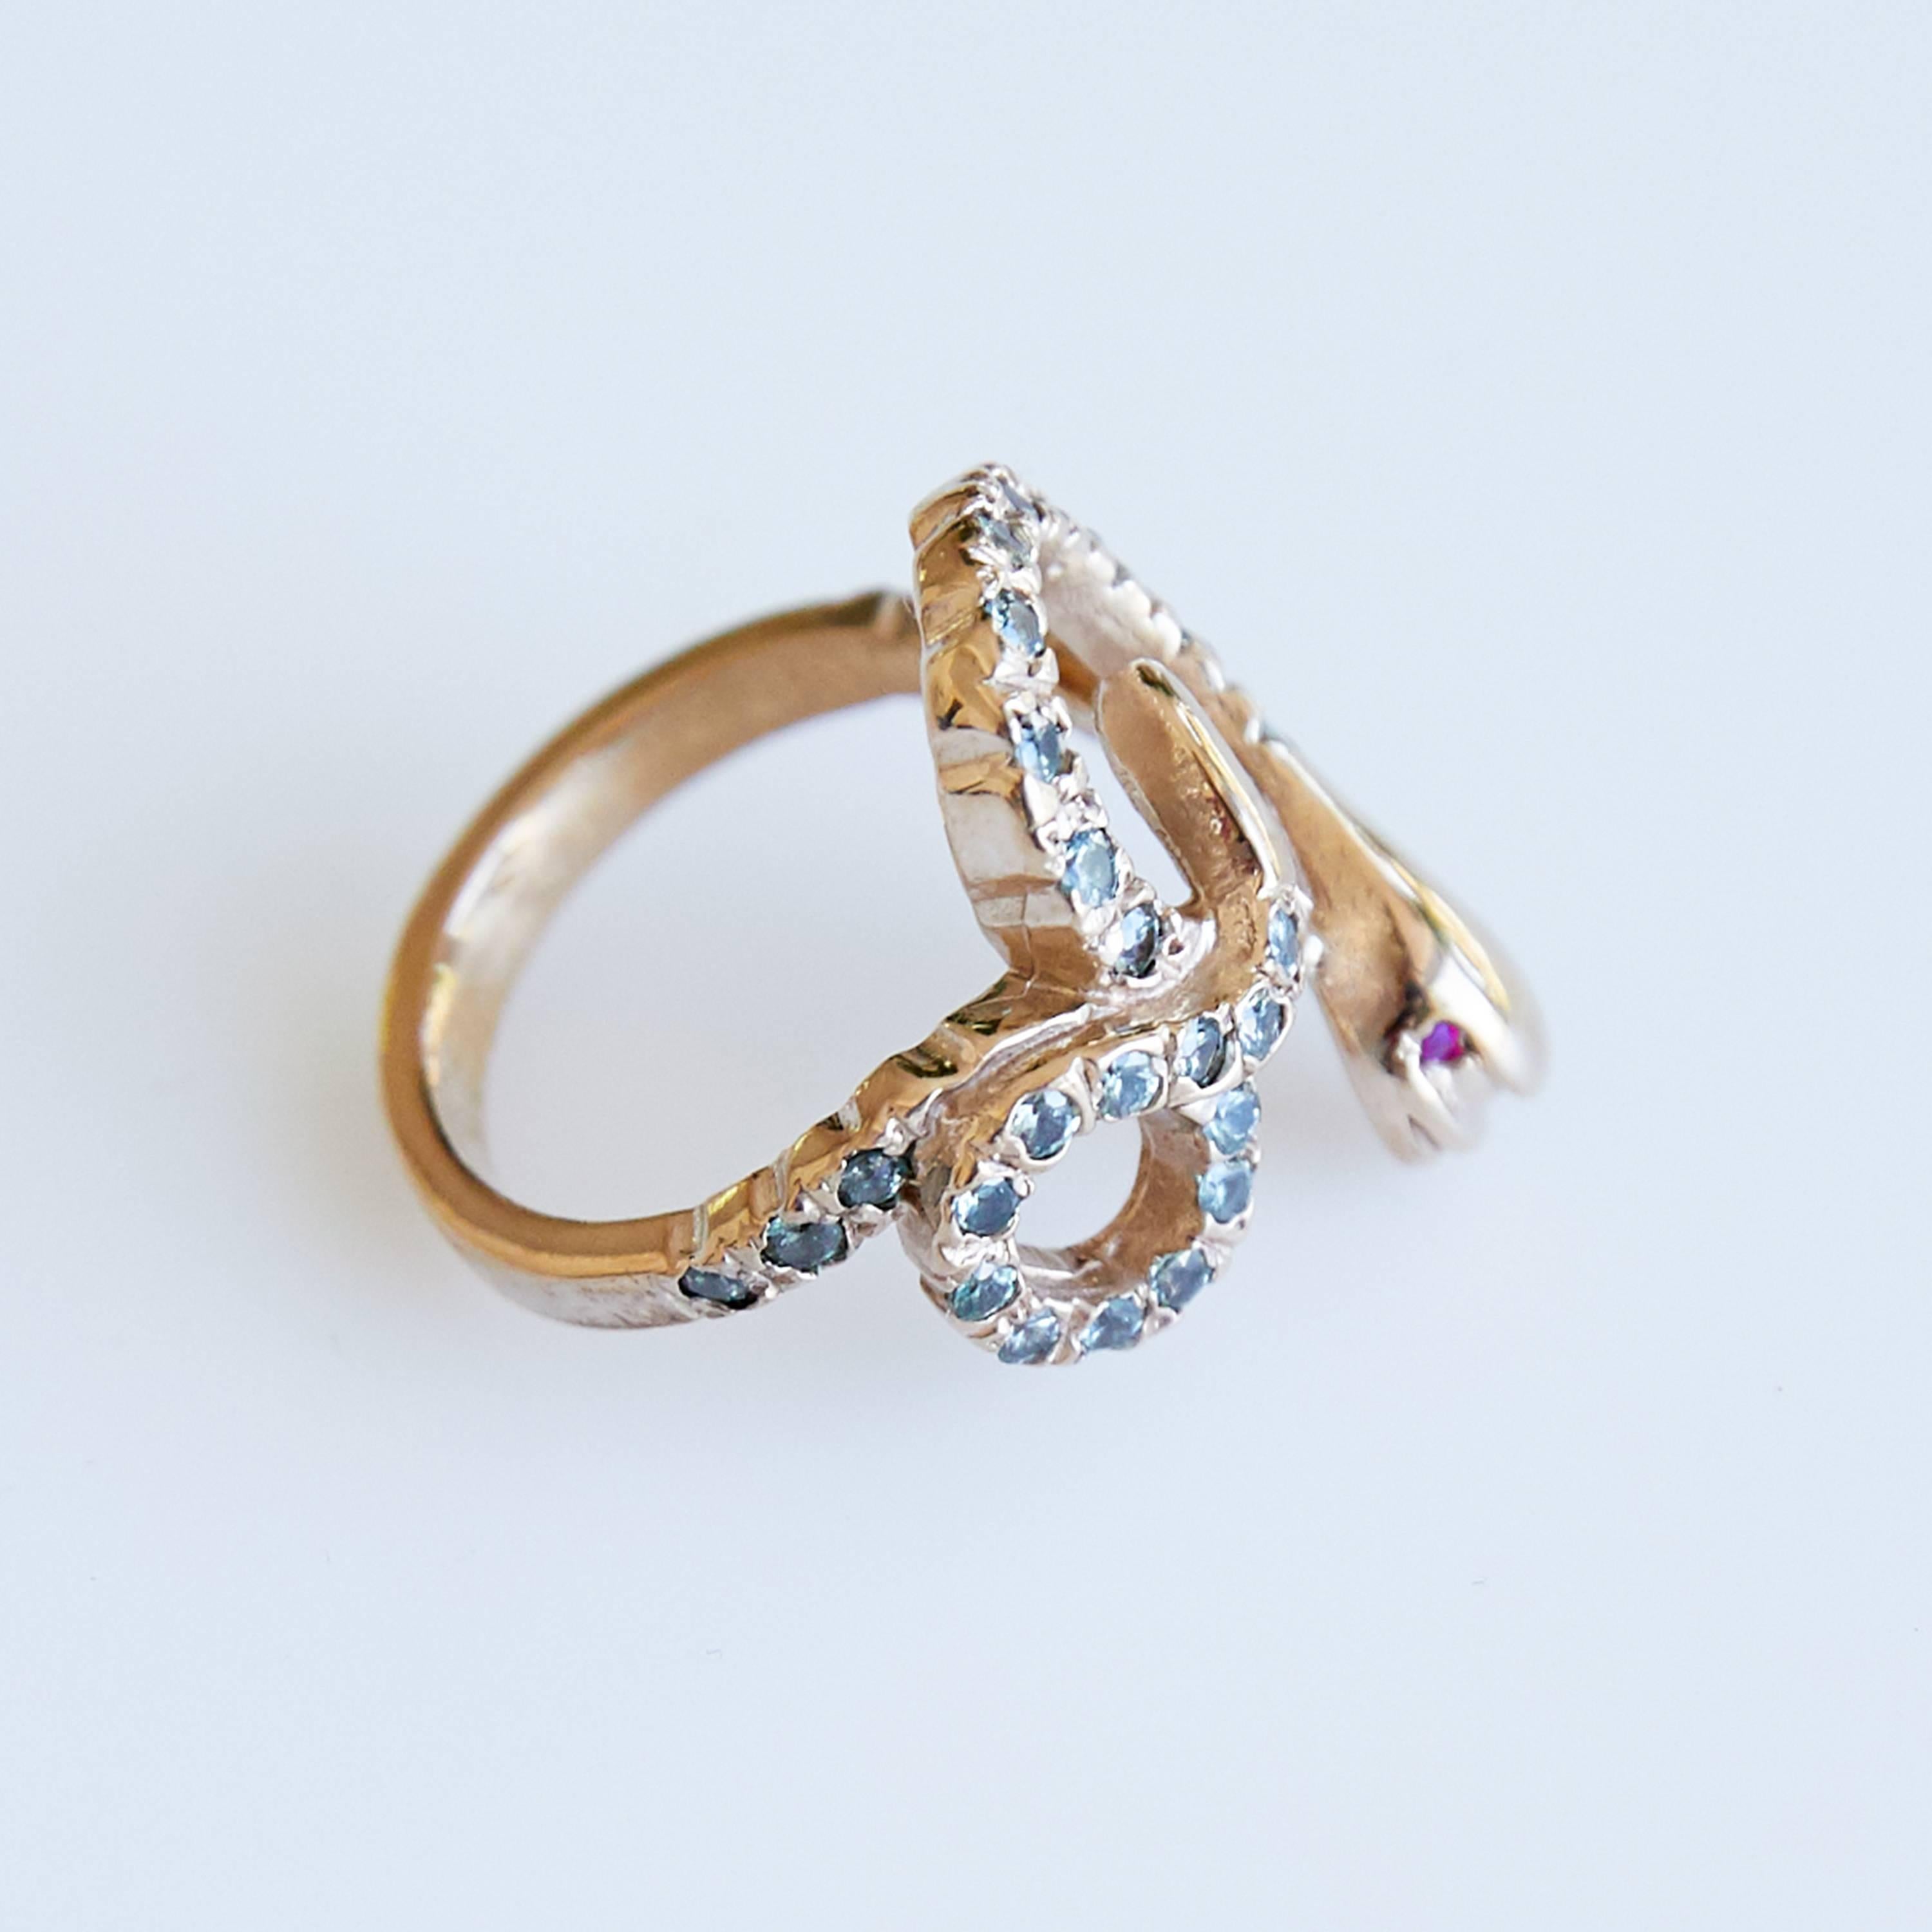 Brilliant Cut Gold Snake Ring Cocktail Ring Sapphire Ruby Animal jewelry J Dauphin For Sale